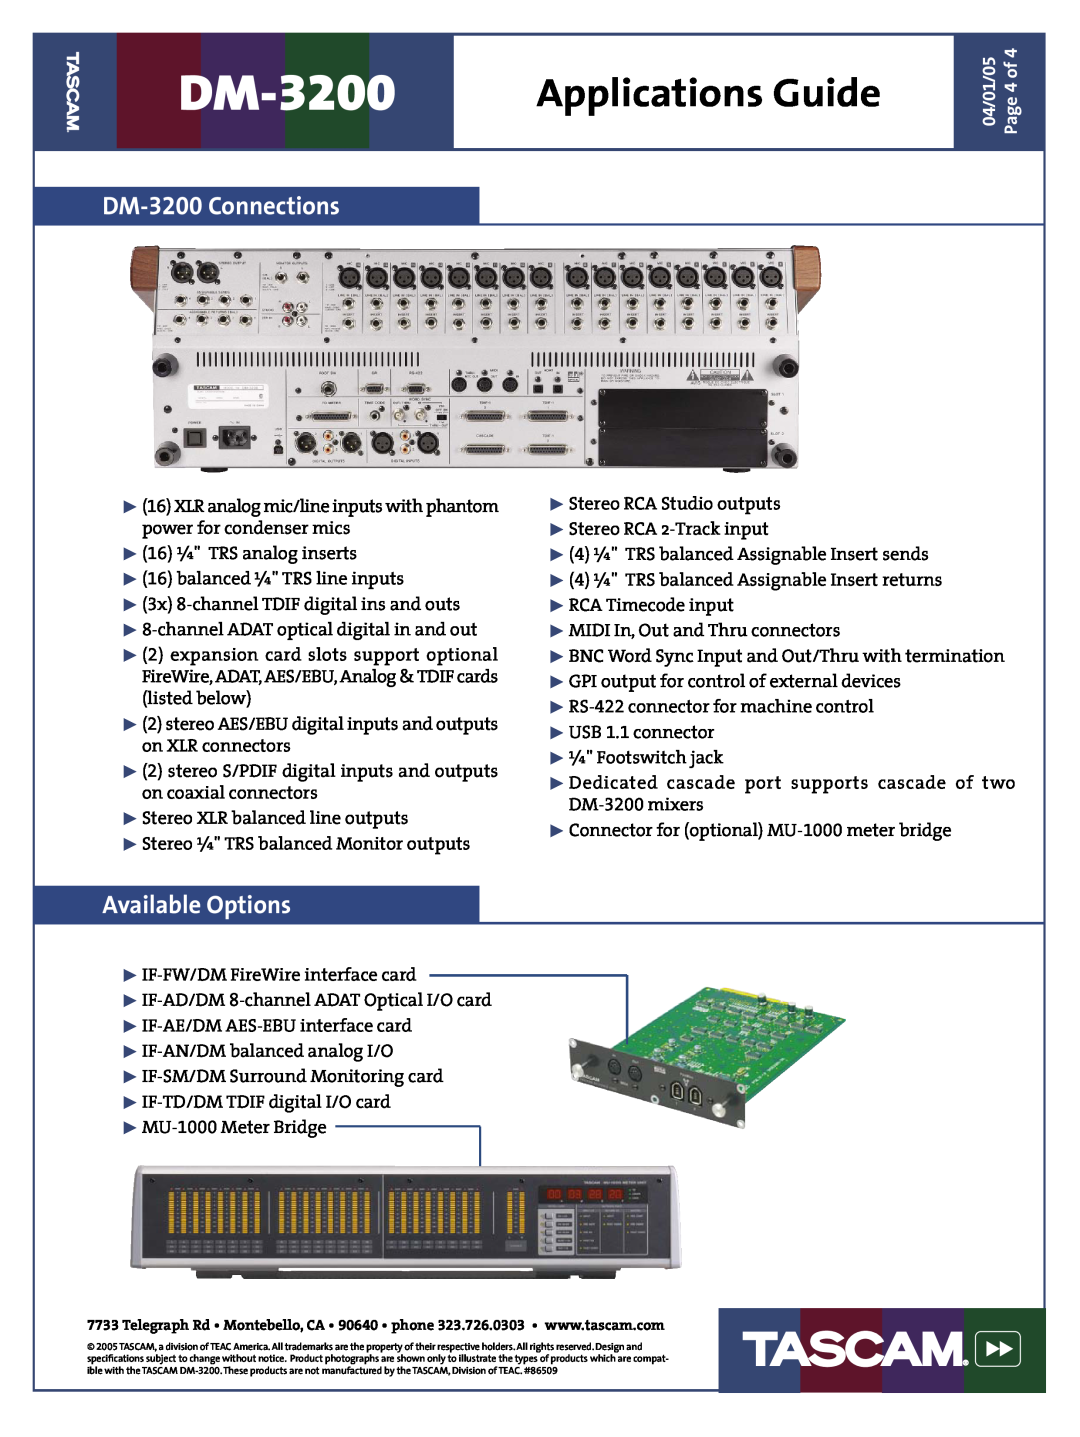 Tascam manual DM-3200 Connections, Available Options, Applications Guide 